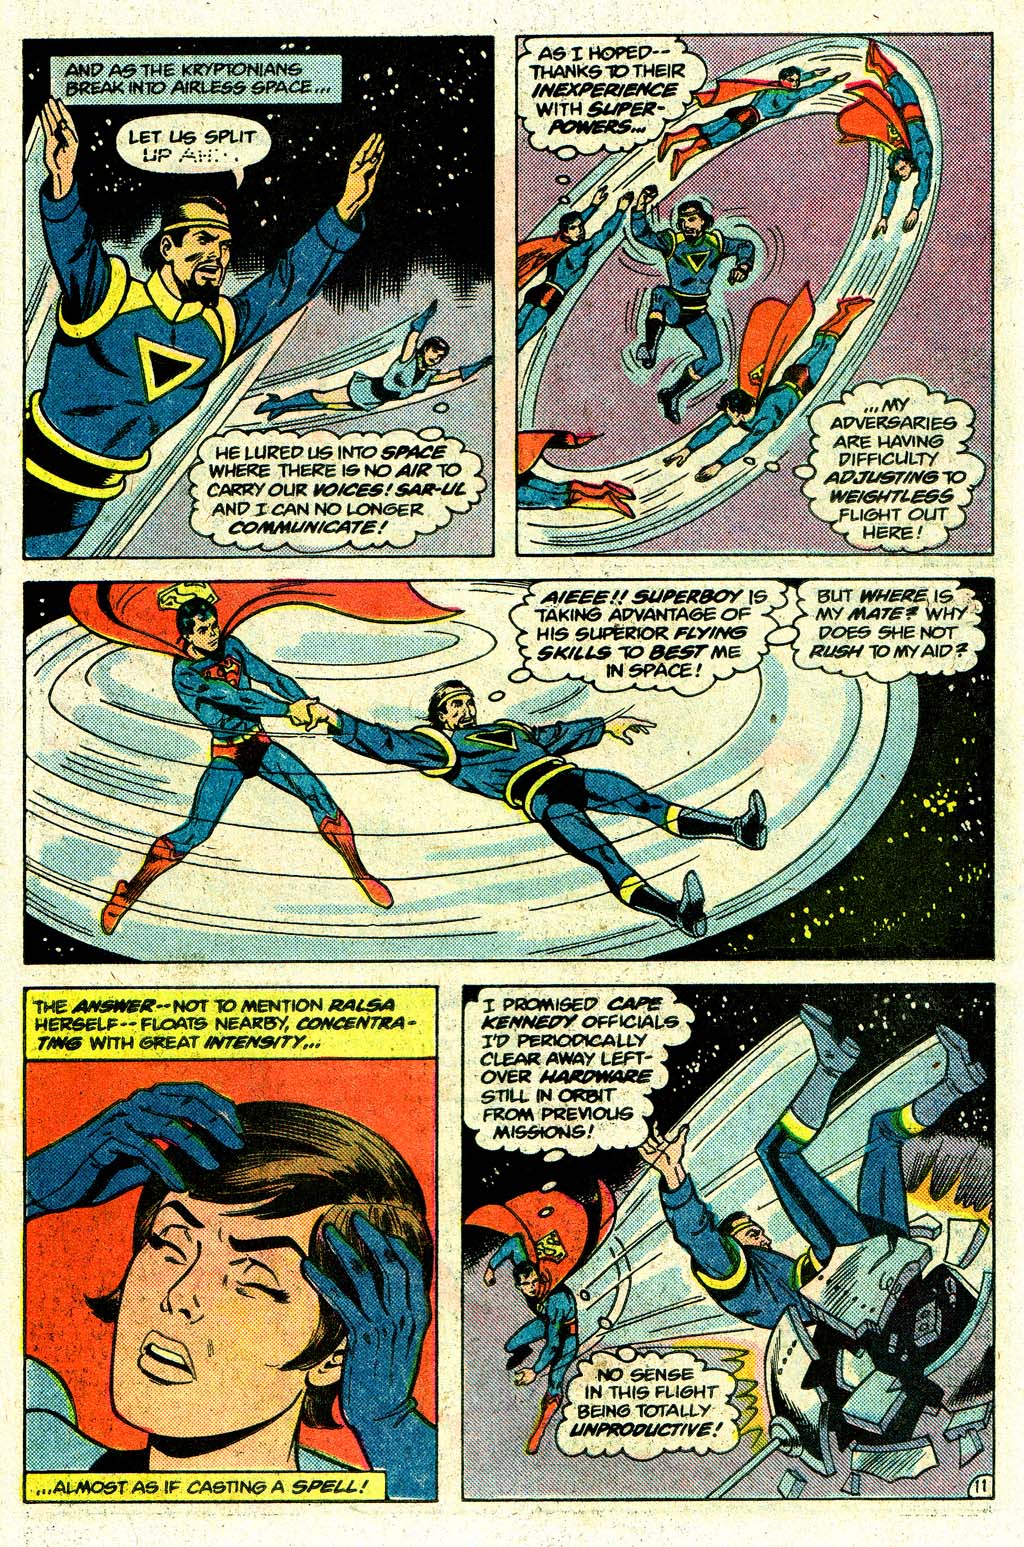 The New Adventures of Superboy 27 Page 14